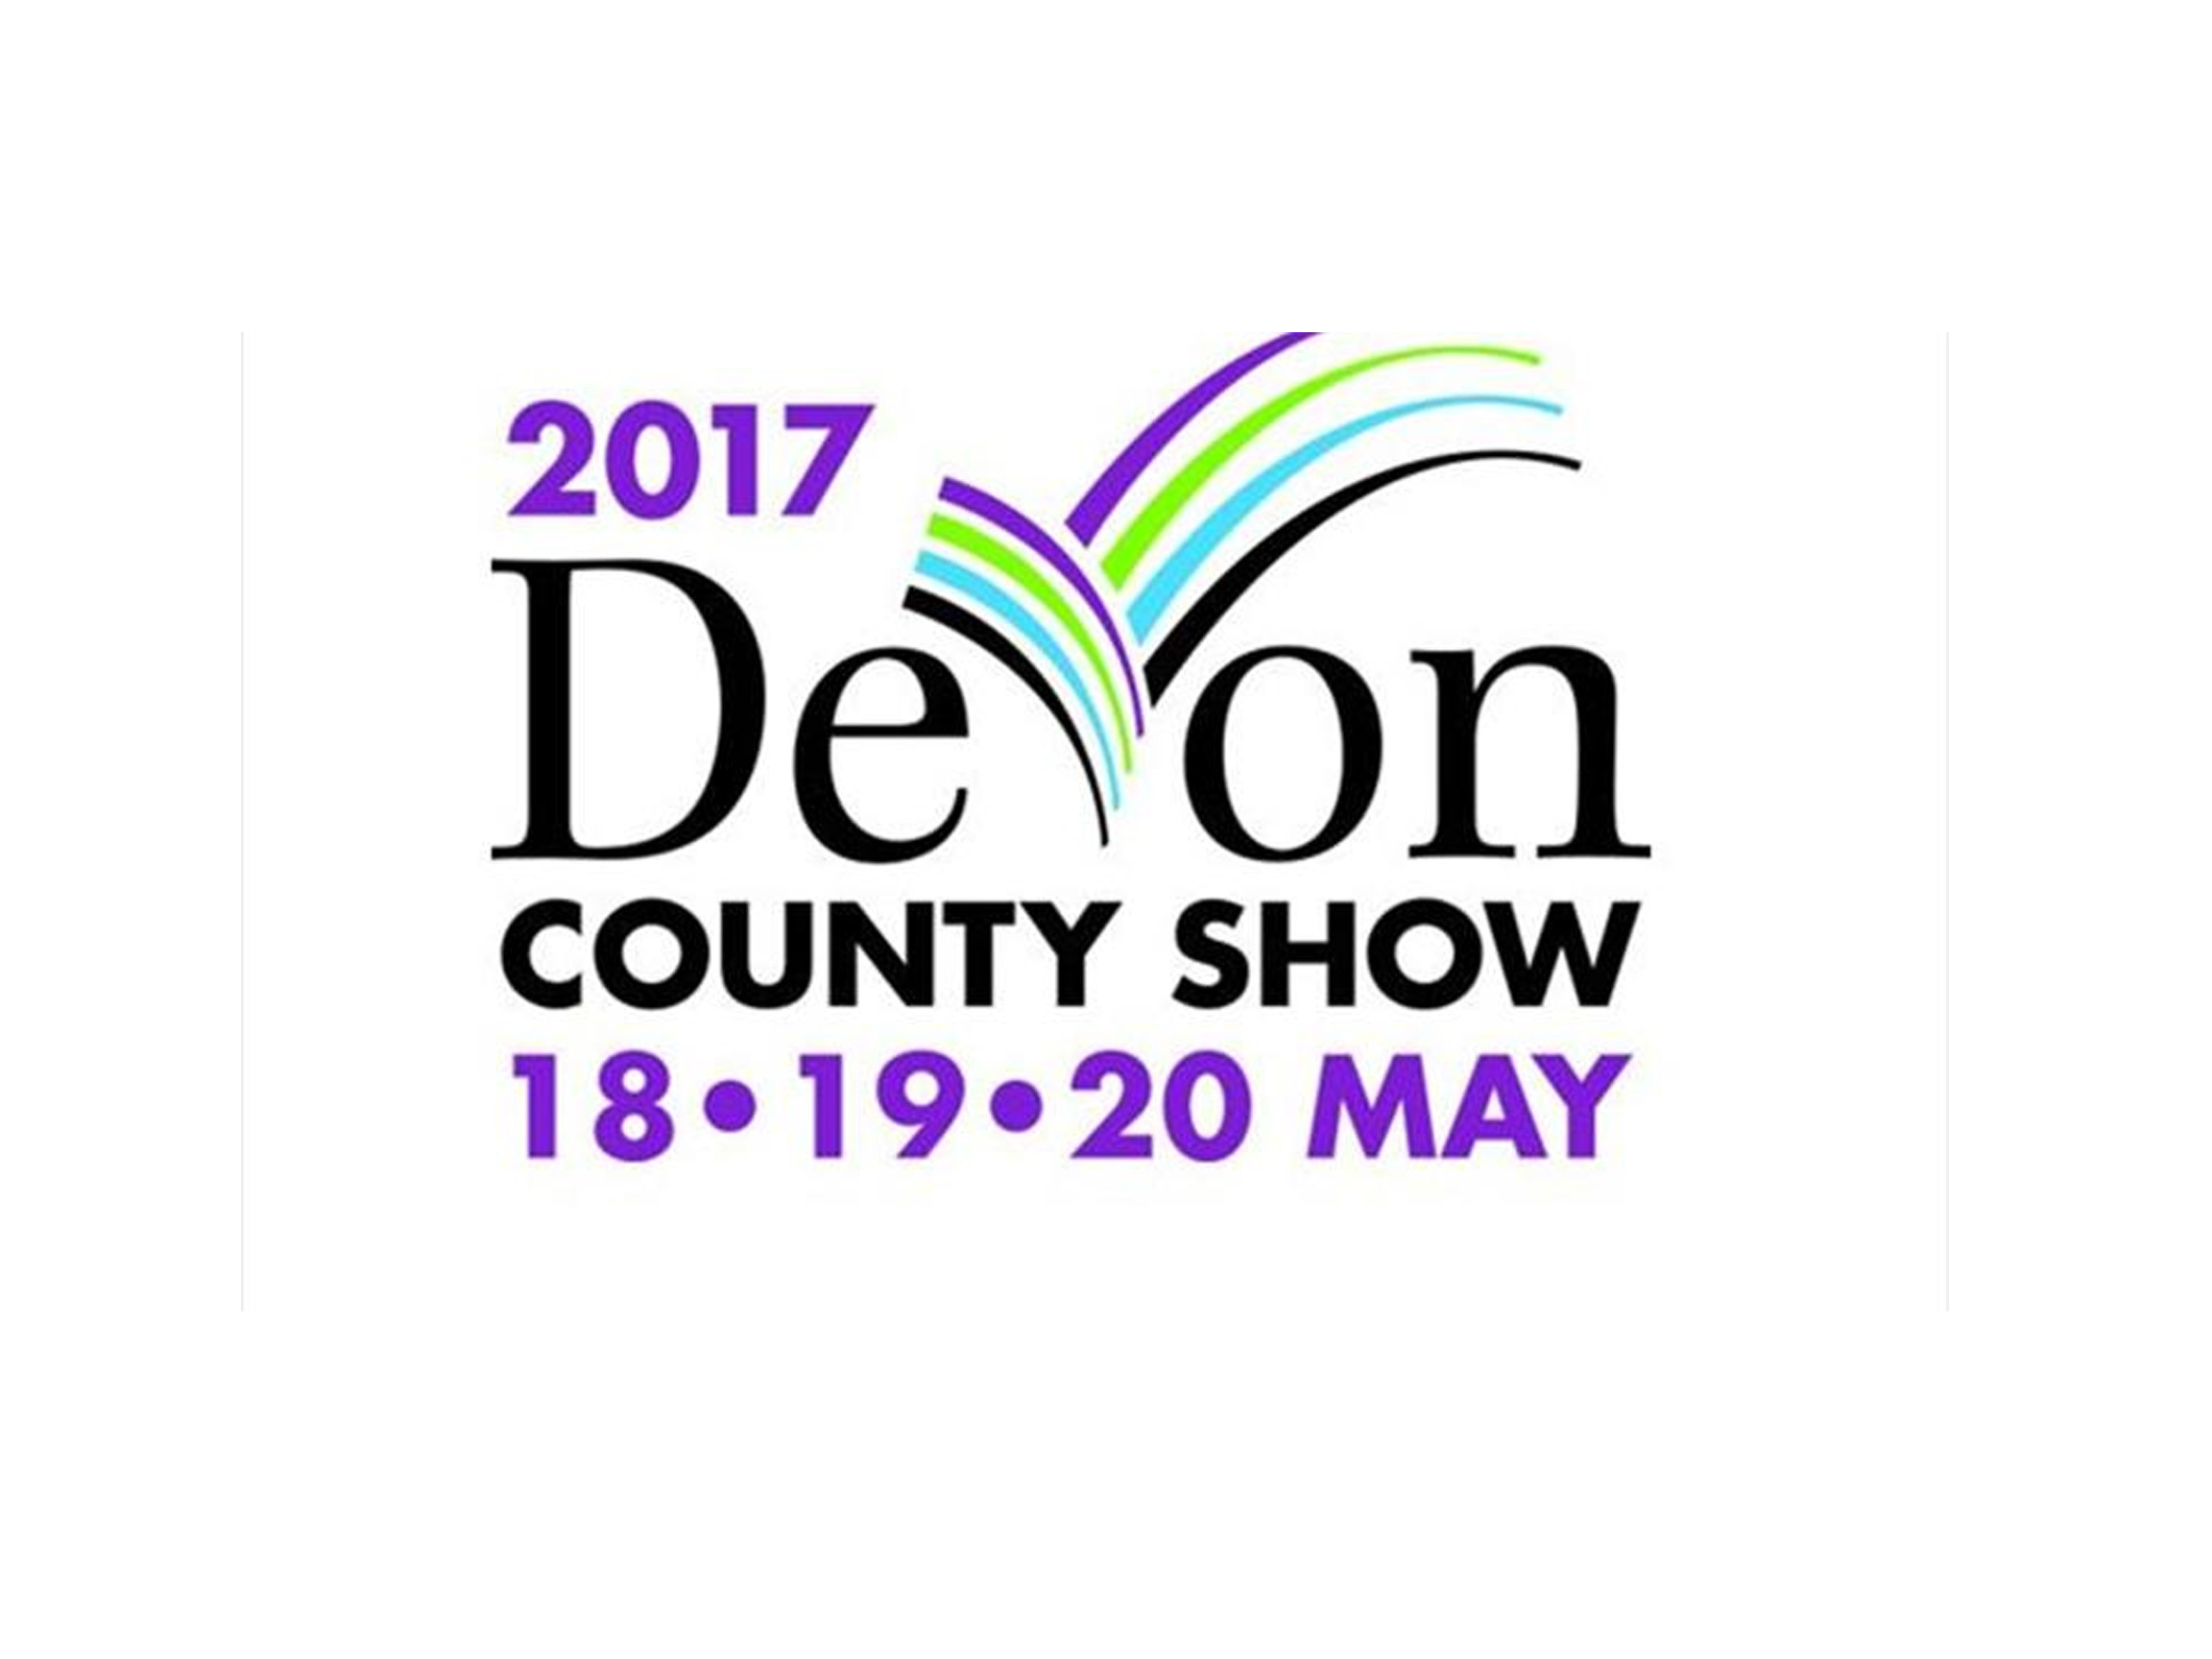 Tremendous equestrian lineup for the Devon County Show